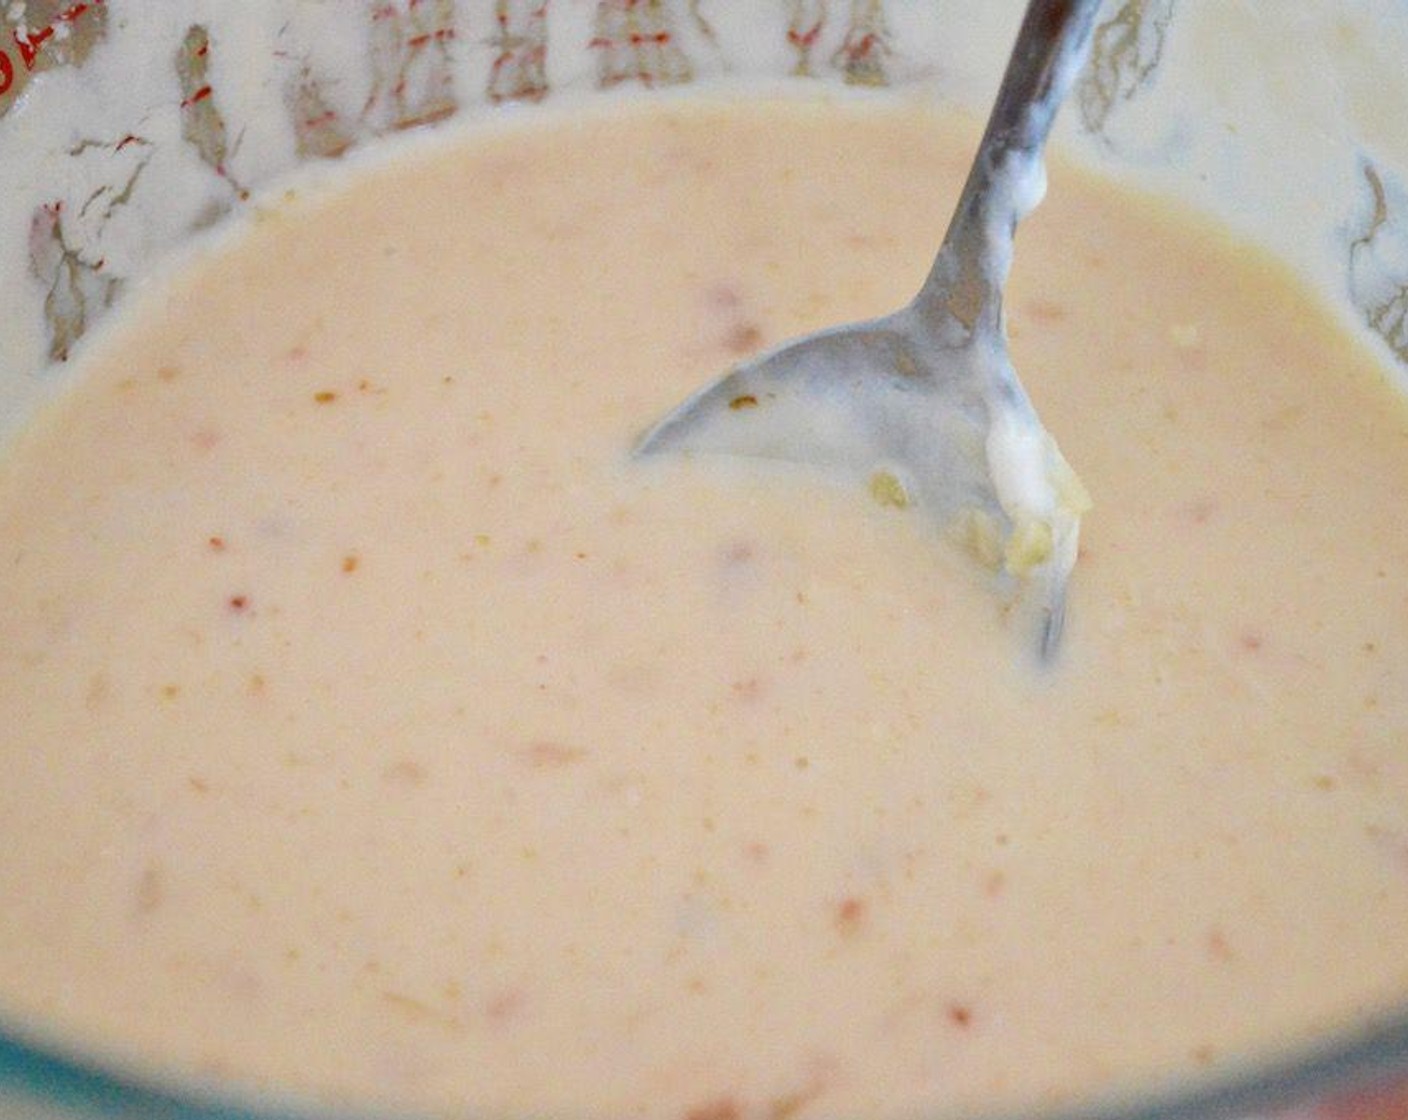 step 1 Simply stir Plain Greek Yogurt (1/2 cup), Thai Sweet Chili Sauce (1/2 cup), Lime (1), McCormick® Garlic Powder (1/2 tsp), Dried Onions (1/2 tsp), Crushed Red Pepper Flakes (1 pinch), Salt (1 pinch), Worcestershire Sauce (1/4 tsp), Low-Sodium Soy Sauce (1/4 tsp) and set it aside.